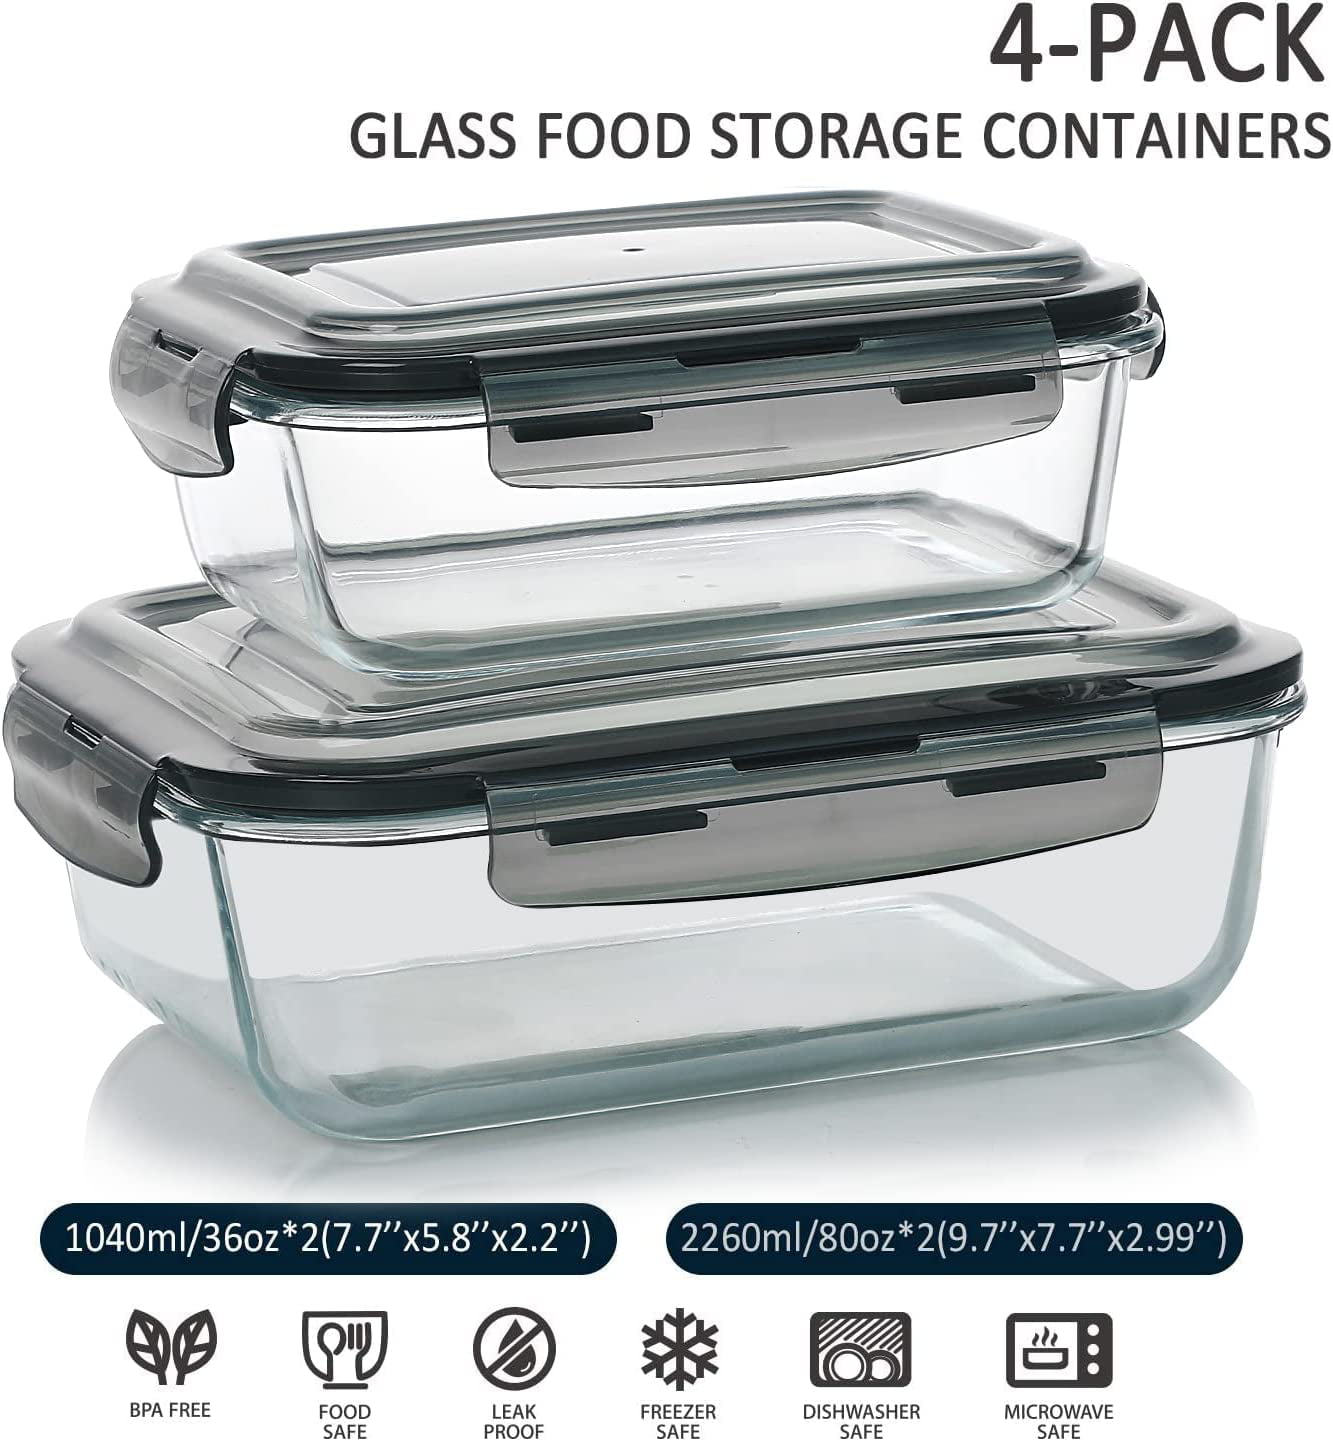 Oven Safe Glass Food Storage Container Set with Plastic Lids - 4 Pack, 4 PC  - Kroger